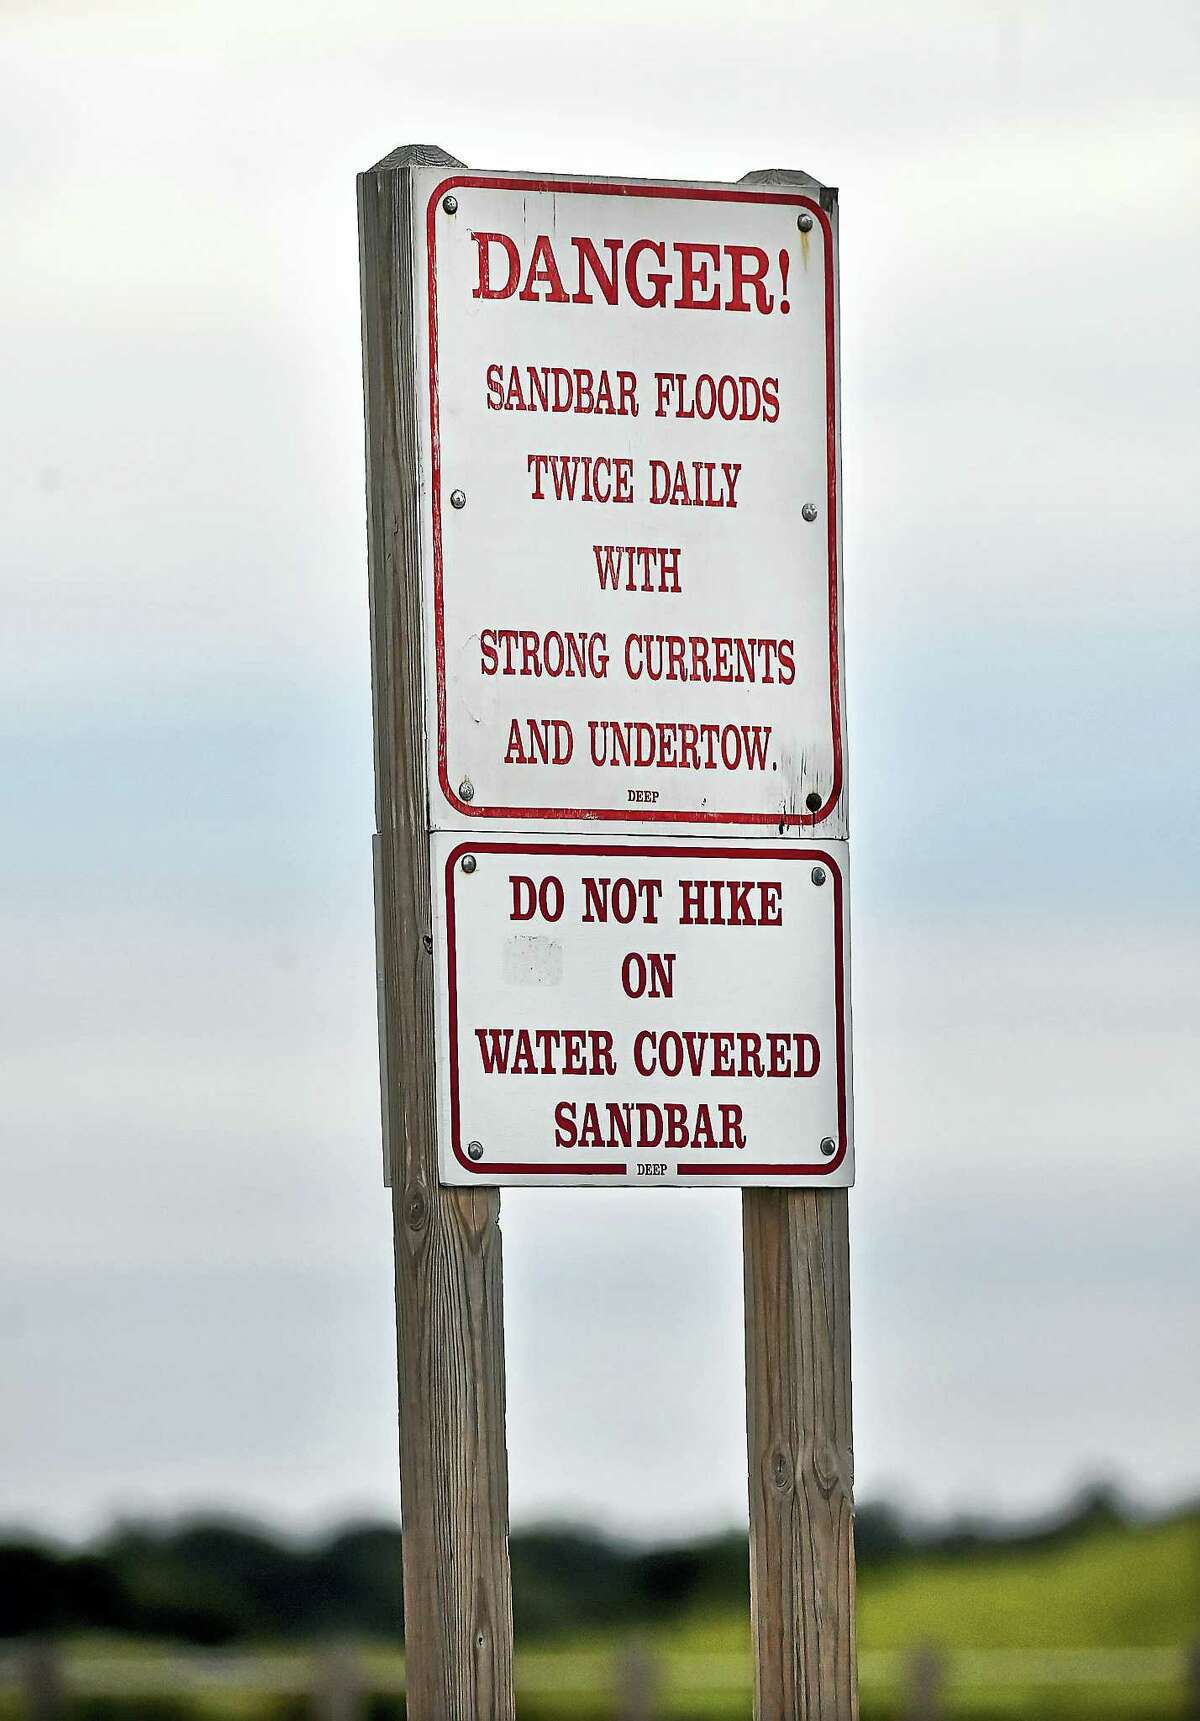 A sign warns beach-goers of strong curtrents and undertow when the sandbar floods at Silver Sands State Park, a public recreation area located on Long Island Sound in Milford, Tuesday, July 25, 2017. (Catherine Avalone – Hearst Connecticut Media)